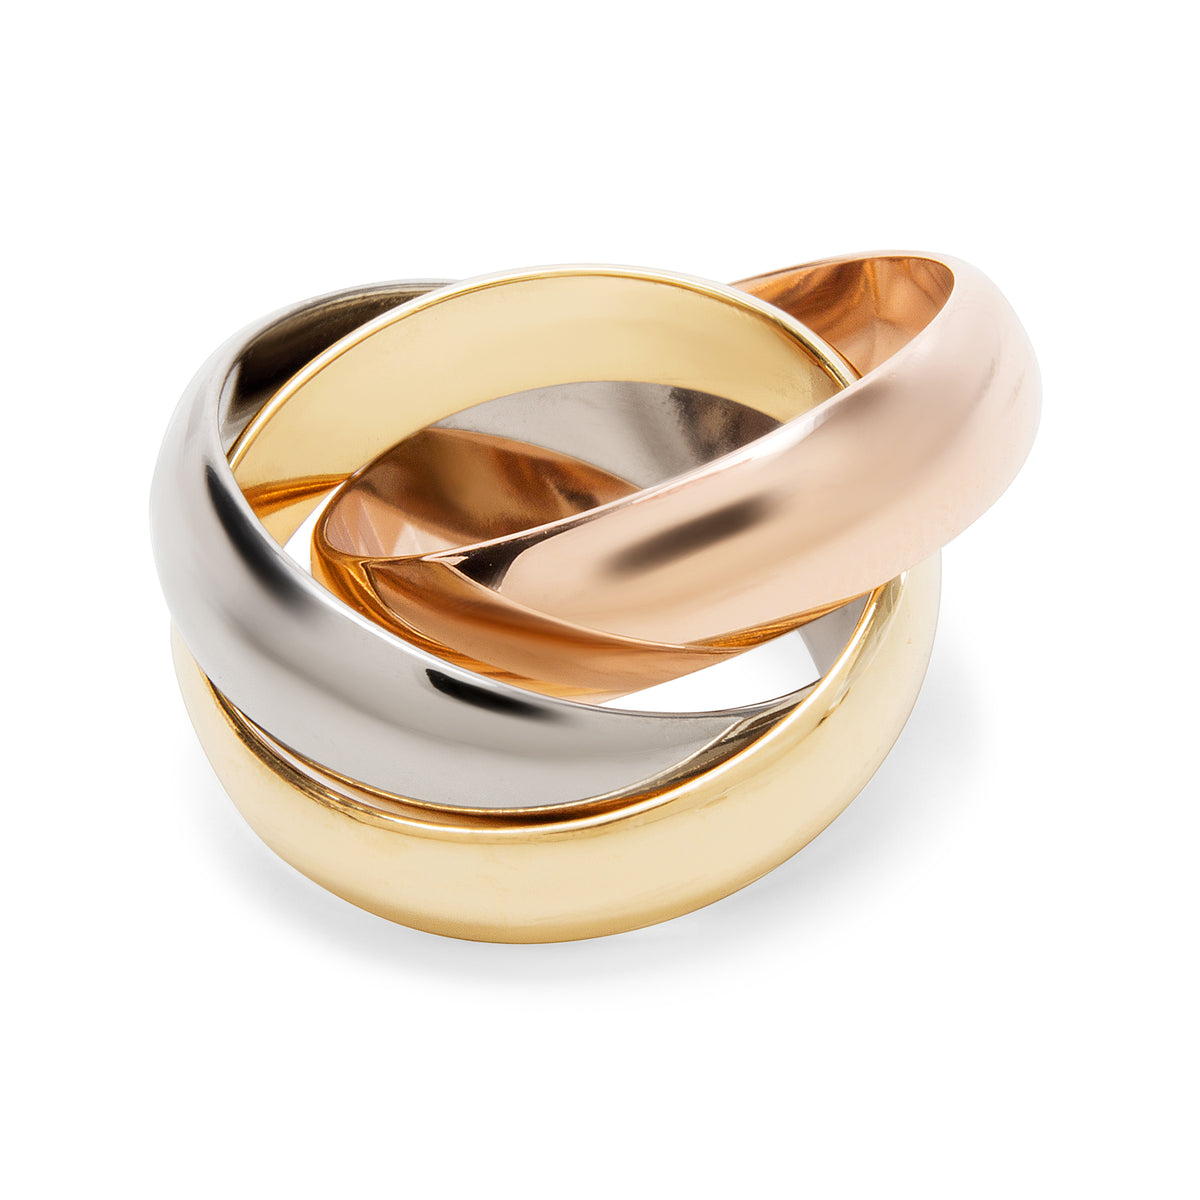 Cartier Trinity Large Model Ring in 18K Yellow, White & Rose Gold (Size 48)